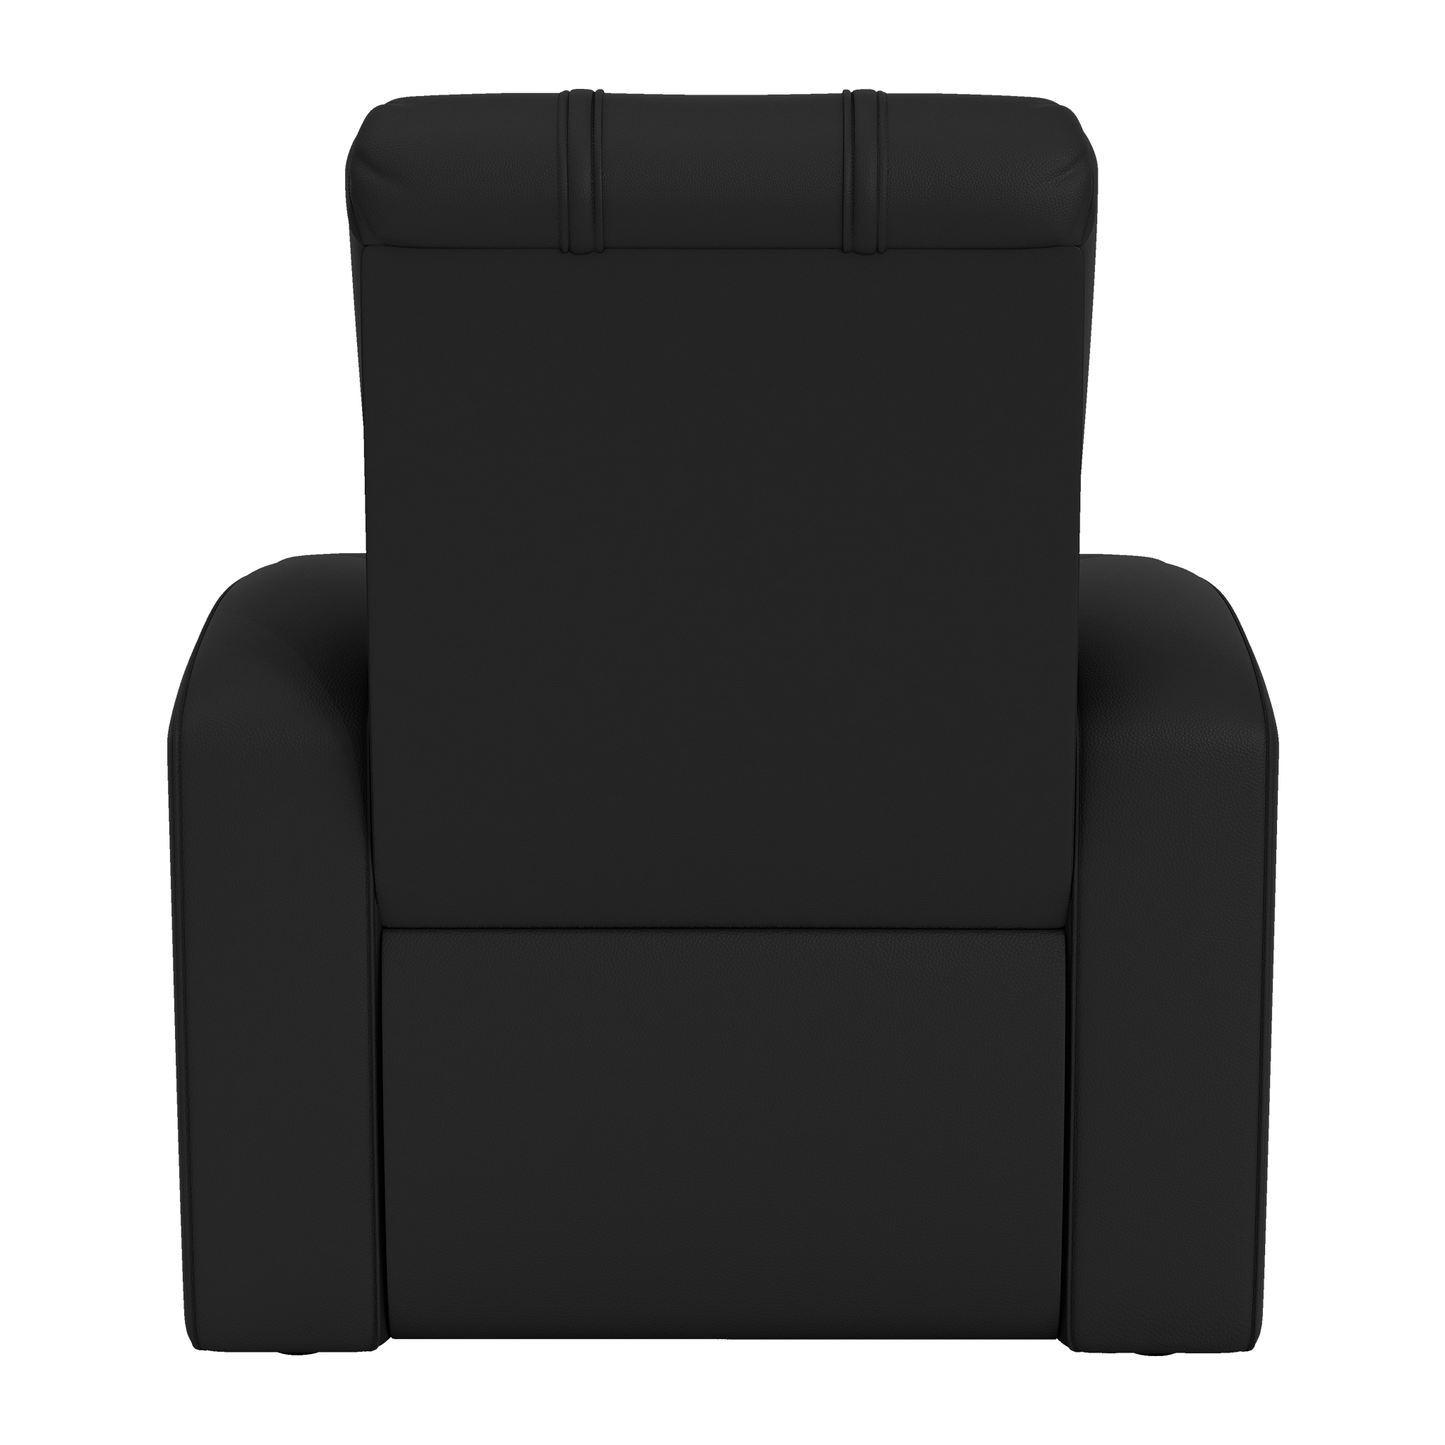 Relax Home Theater Recliner Miami Heat Secondary Logo